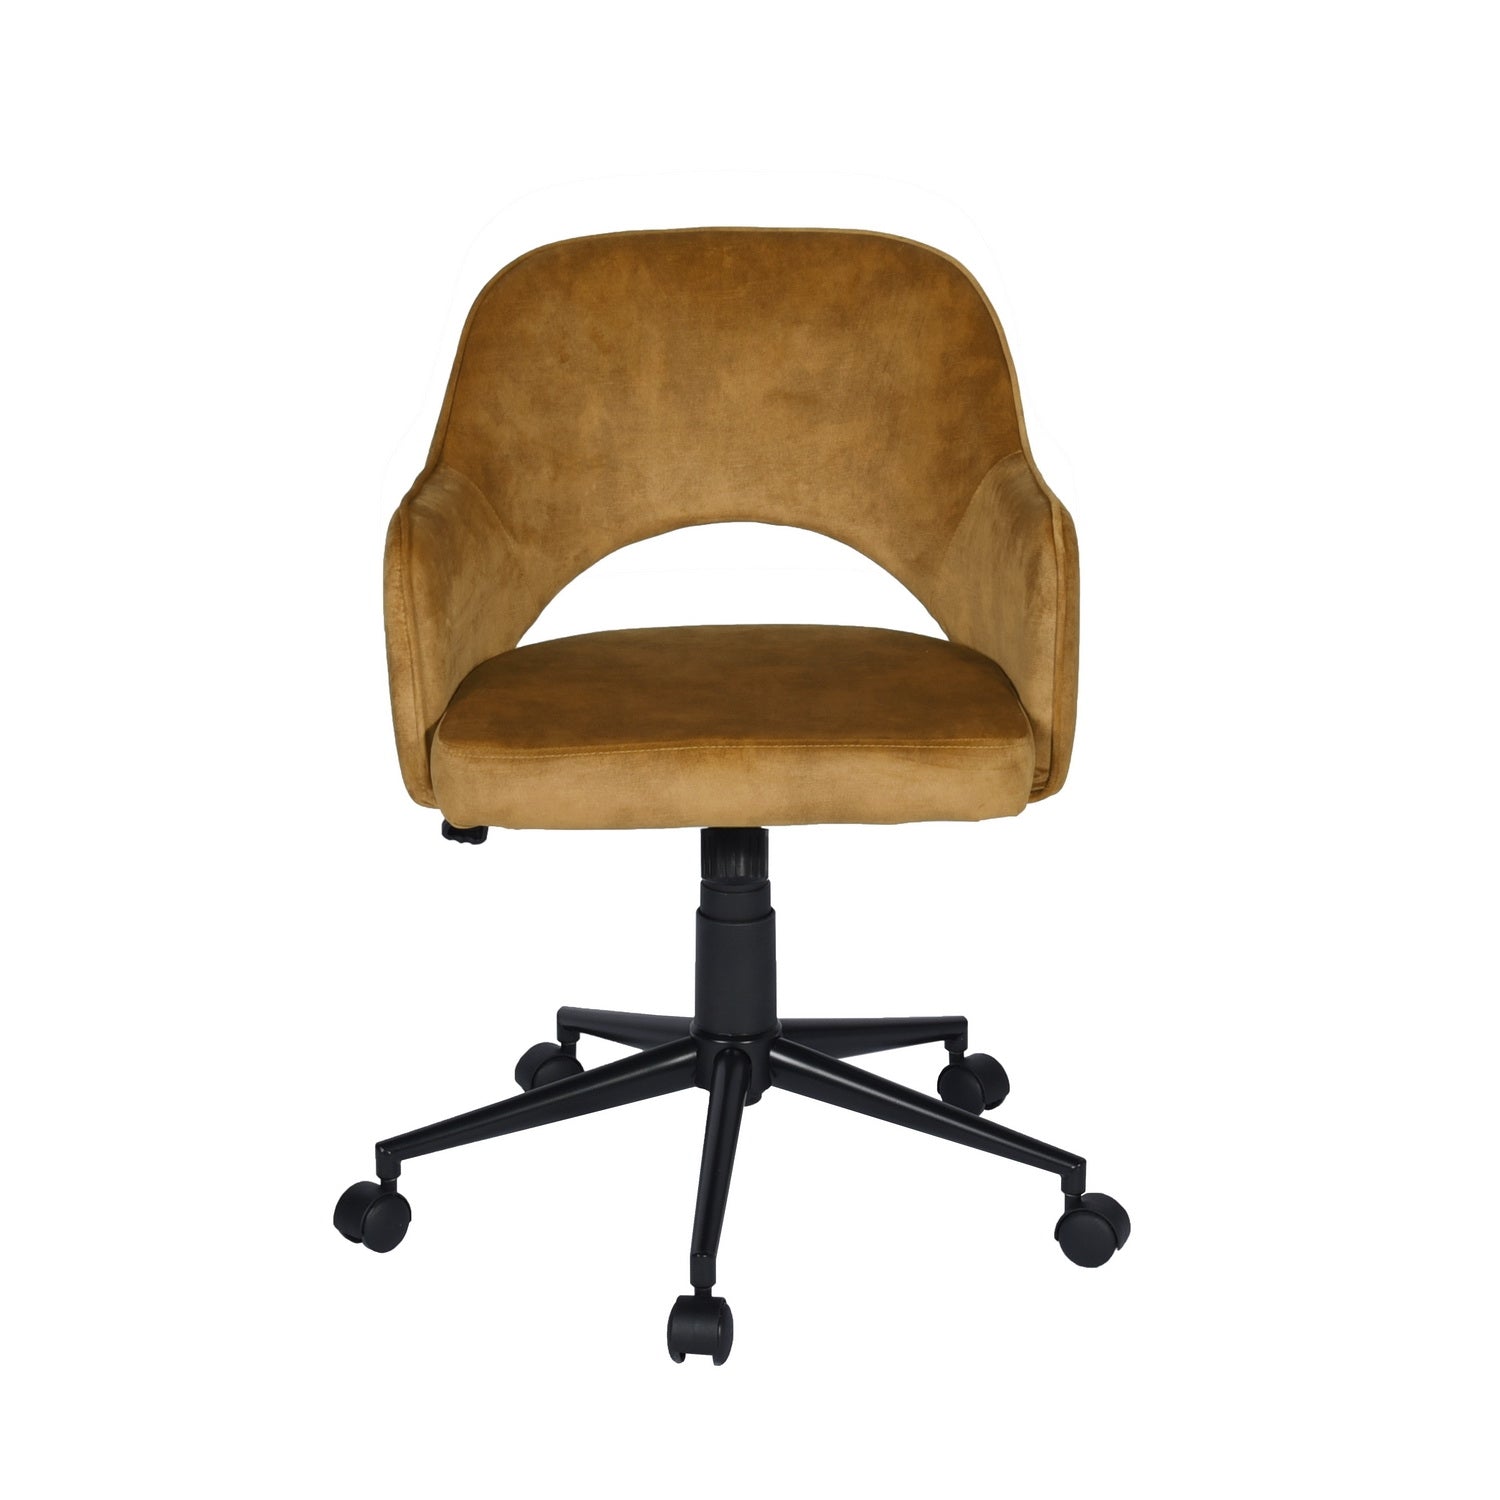 Clarkson Mustand Office Chairs